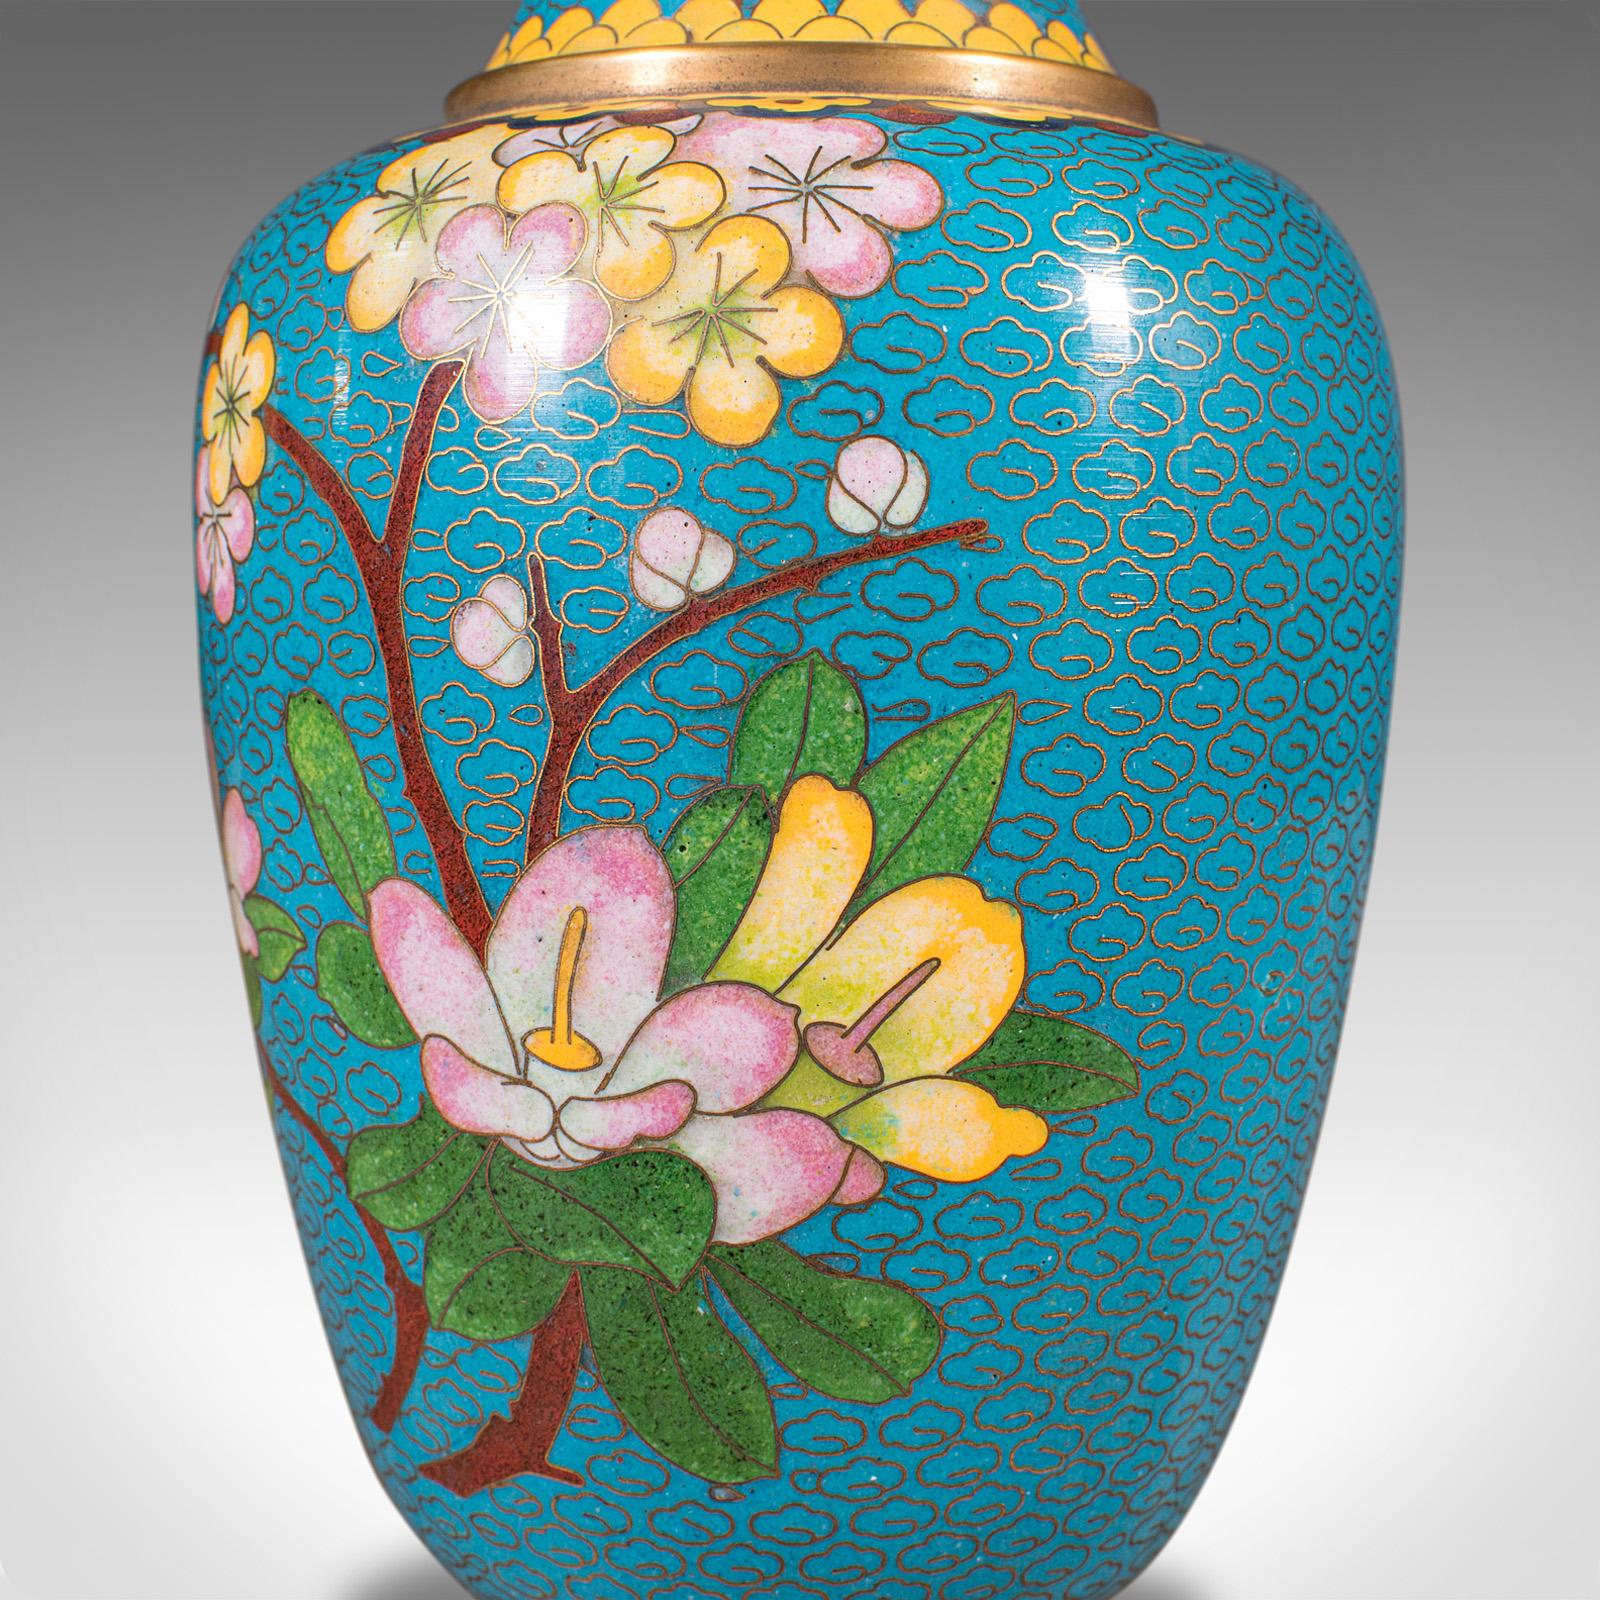 Pair Of Vintage Cloisonne Posy Vases, Chinese, Flower, Baluster, Art Deco, 1940 For Sale 2